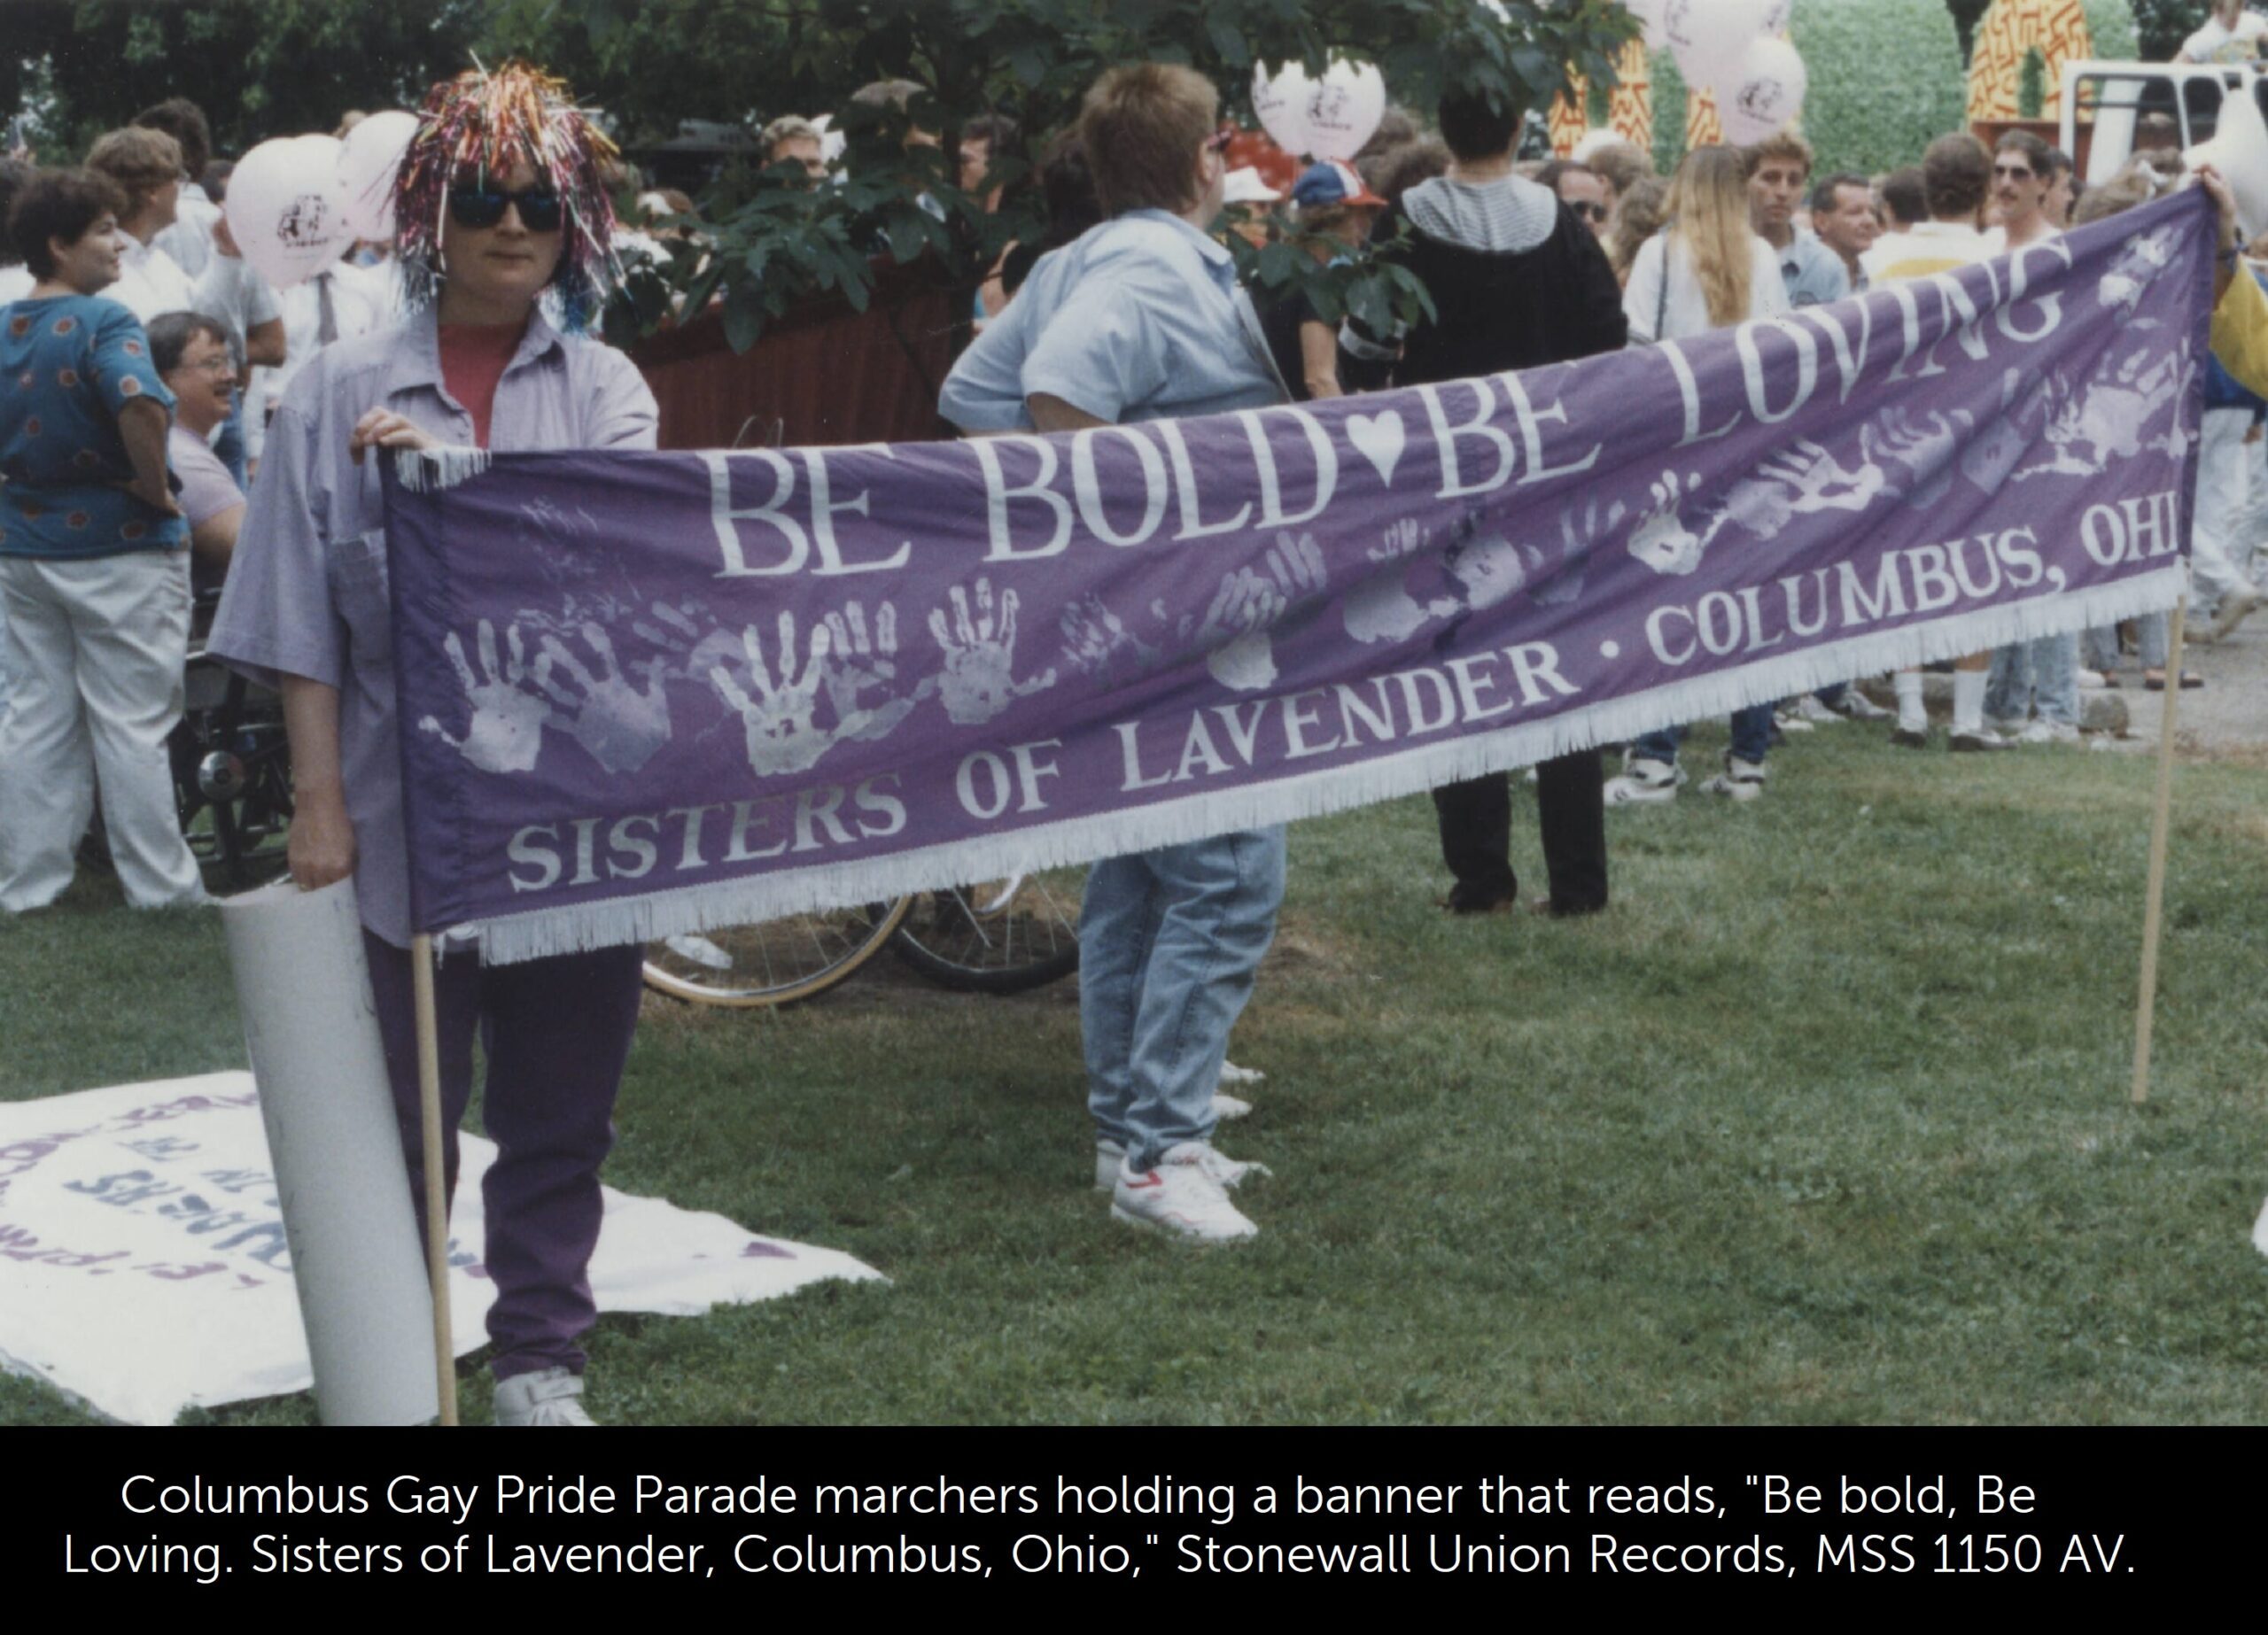 A photo of Gay Pride marchers holding a banner that reads, "Be bold, Be Loving. Sisters of Lavender, Columbus, Ohio."